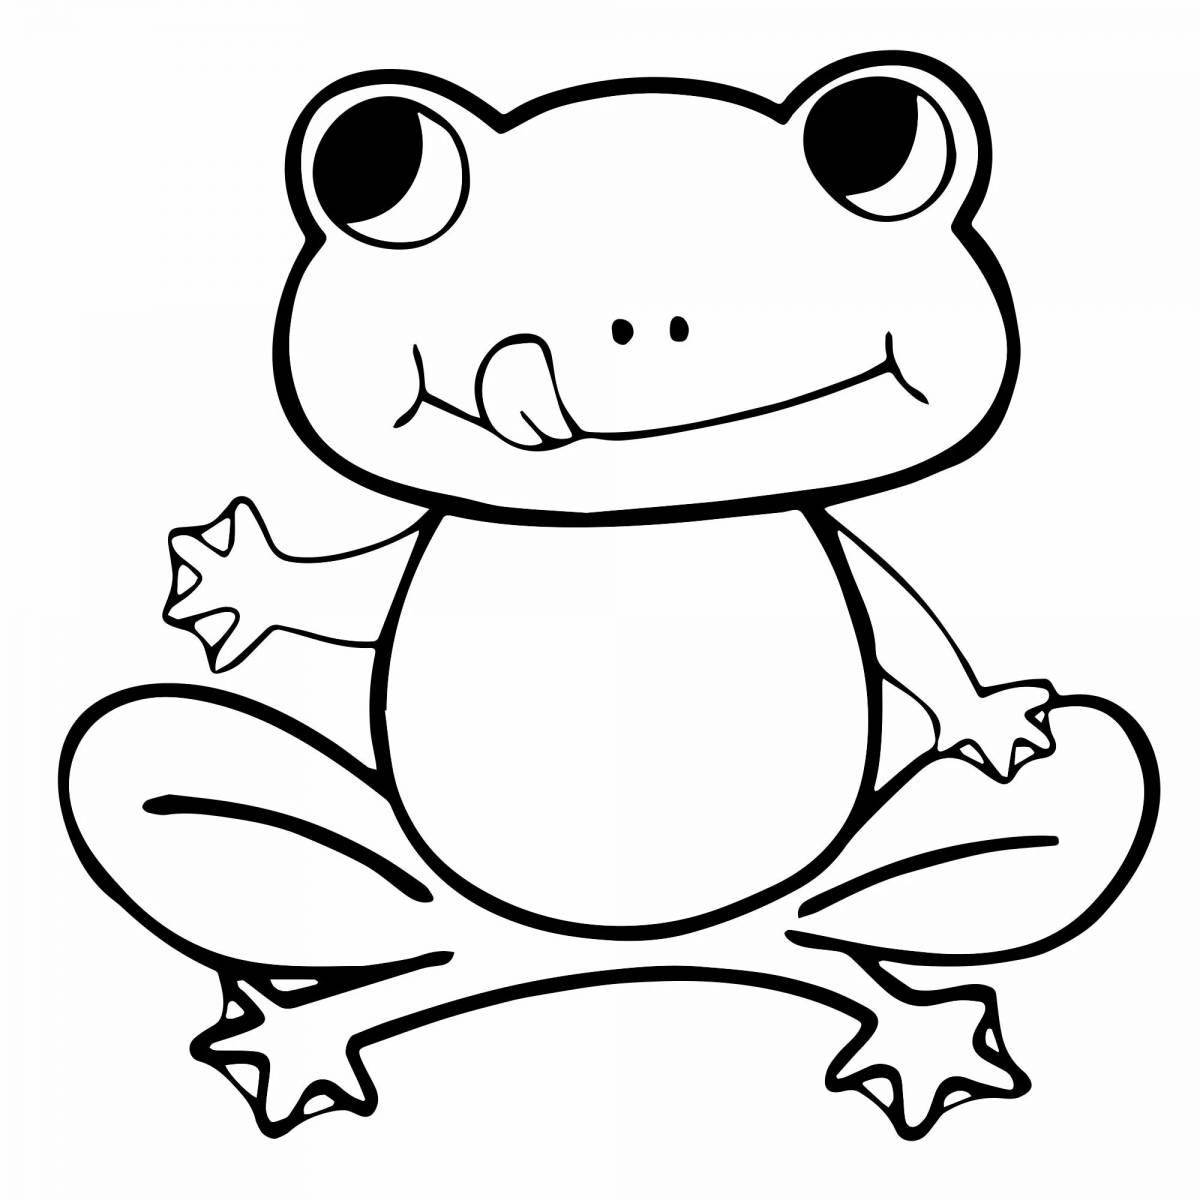 Exciting frog coloring book for kids